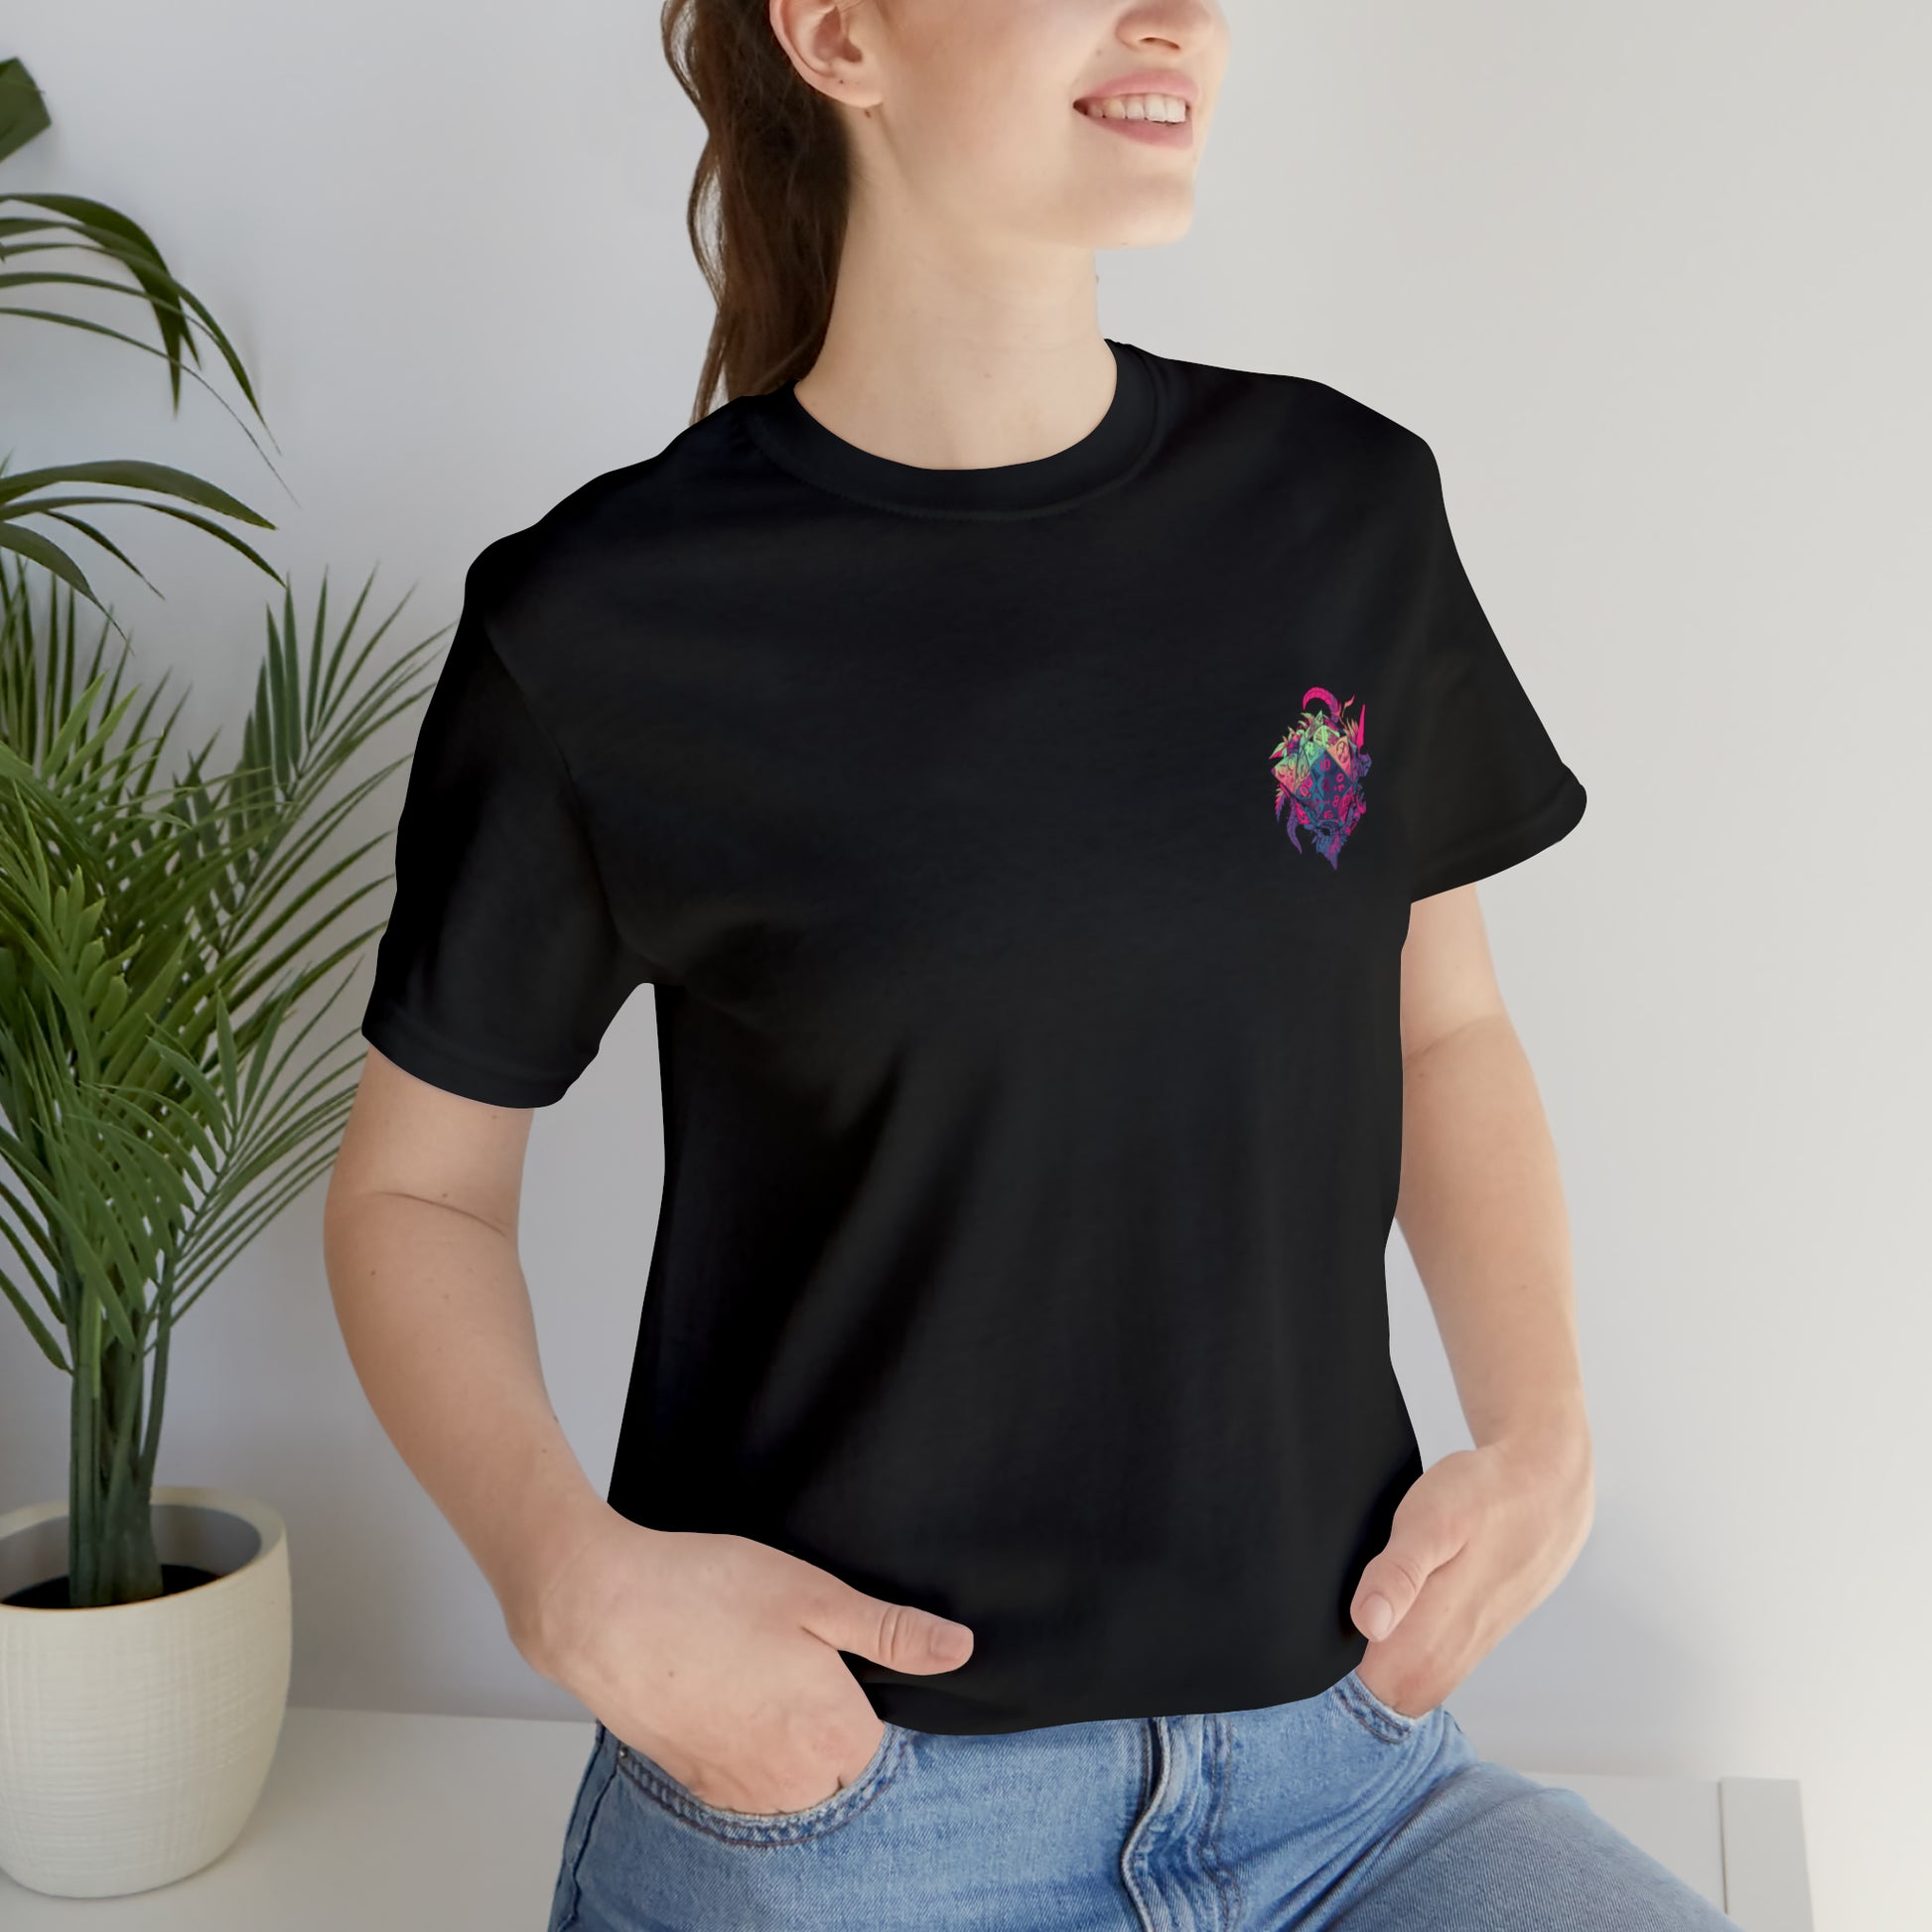 black-quest-thread-tee-shirt-with-small-colorful-dice-in-pink-jungle-on-chest